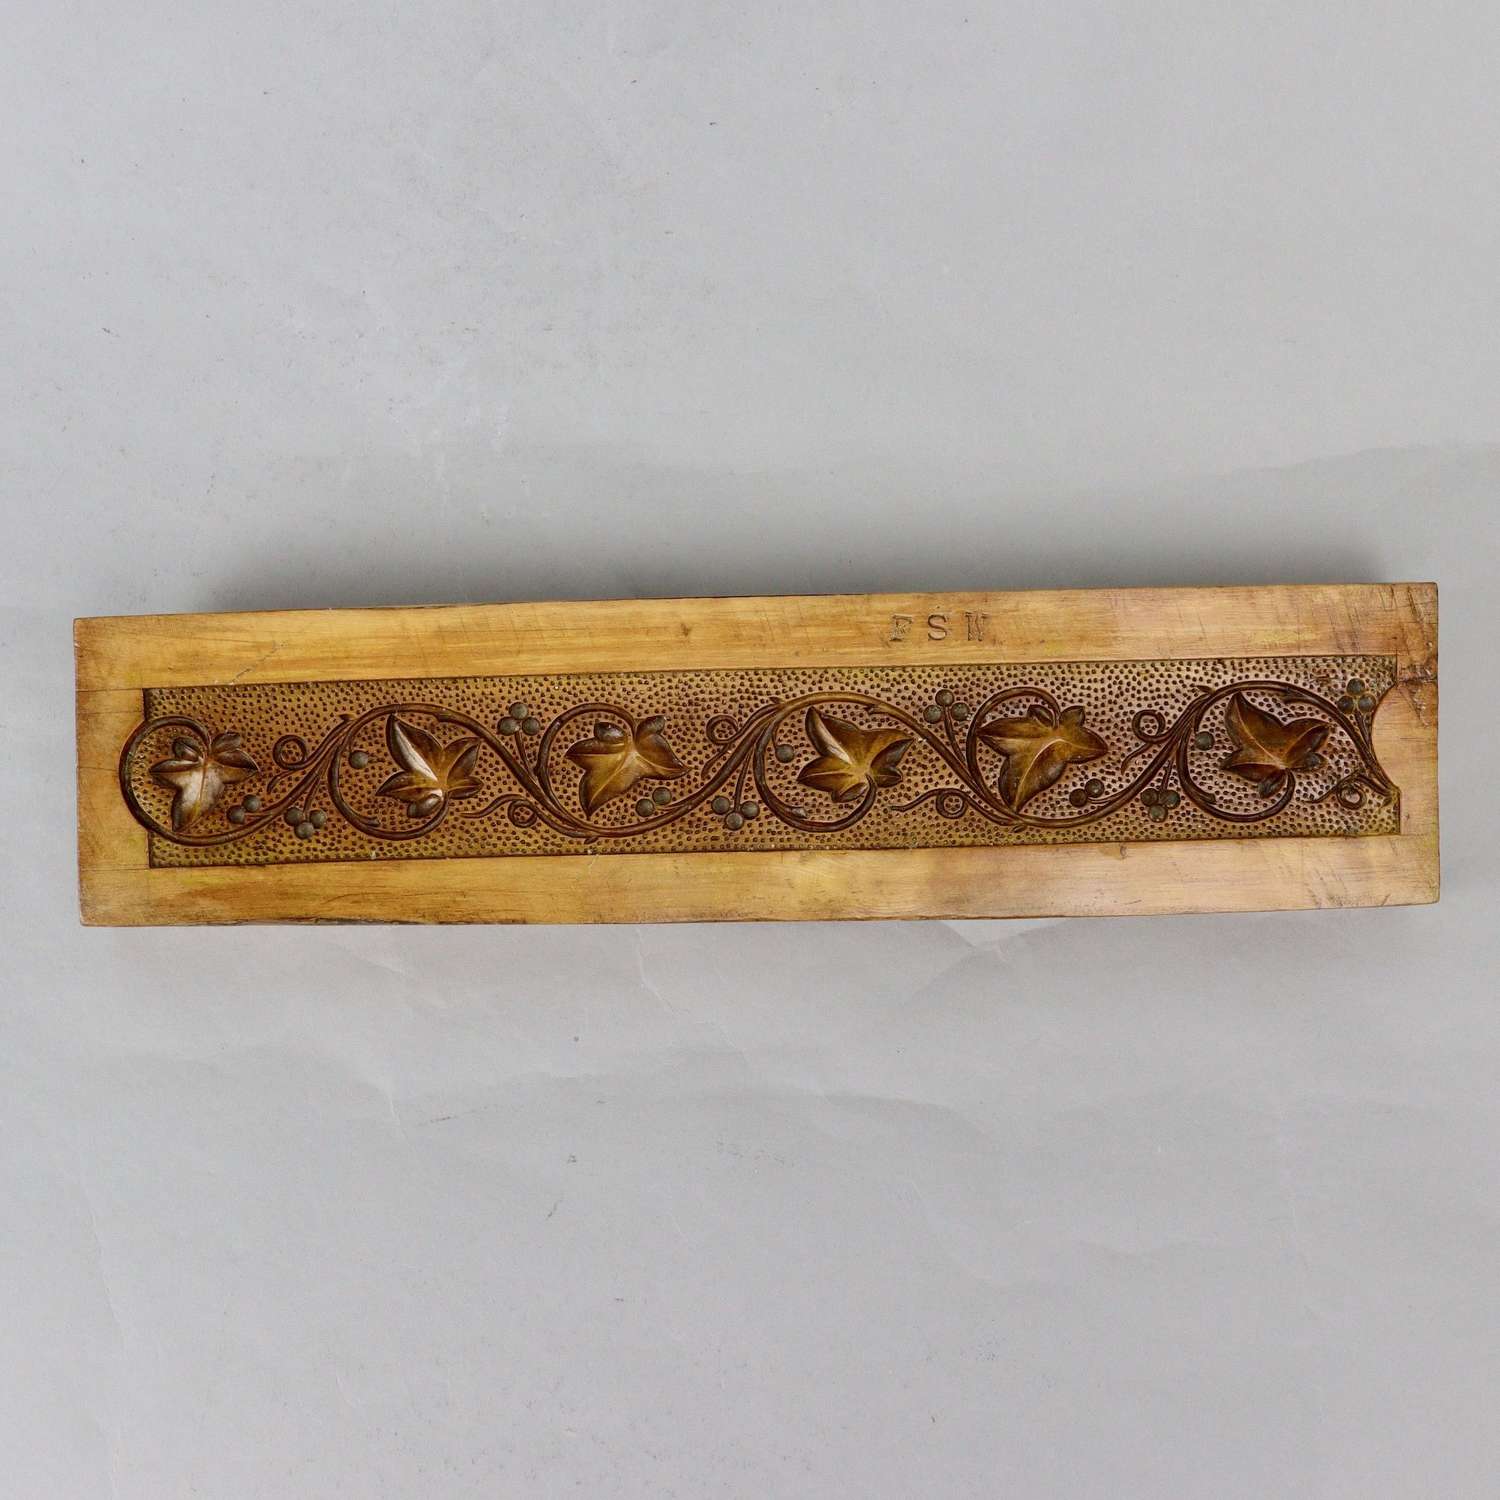 Boxwood mould carved with ivy border